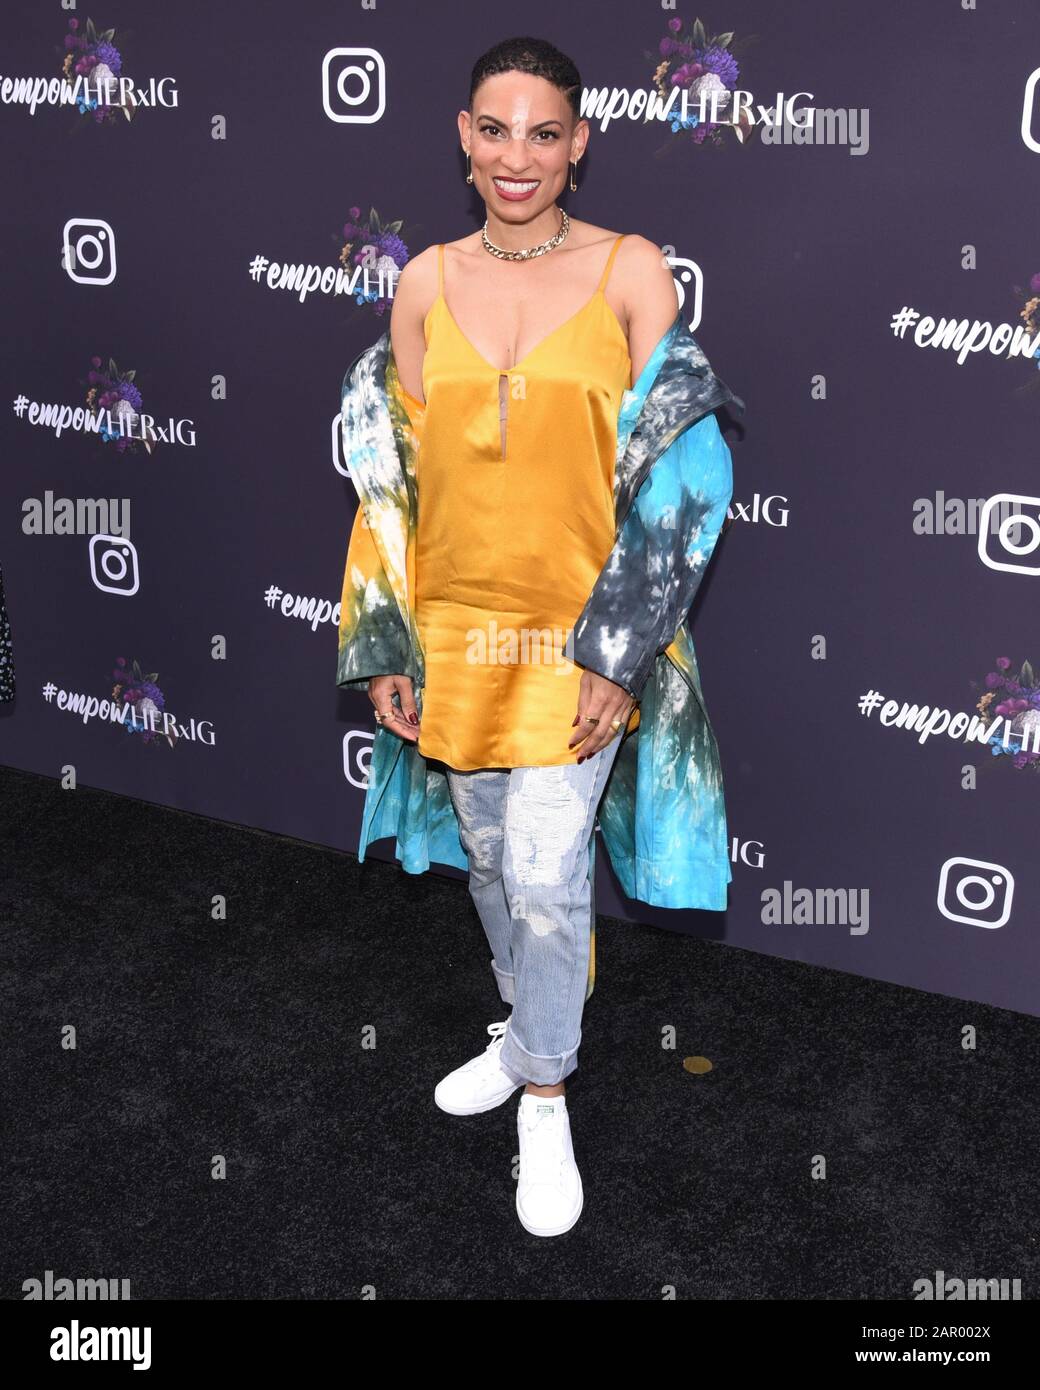 January 24, 2020, West Hollywood, CA, USA: Goapele attends the Instagram's GRAMMY Luncheon at Yasbel. (Credit Image: © Billy Bennight/ZUMA Wire) Stock Photo